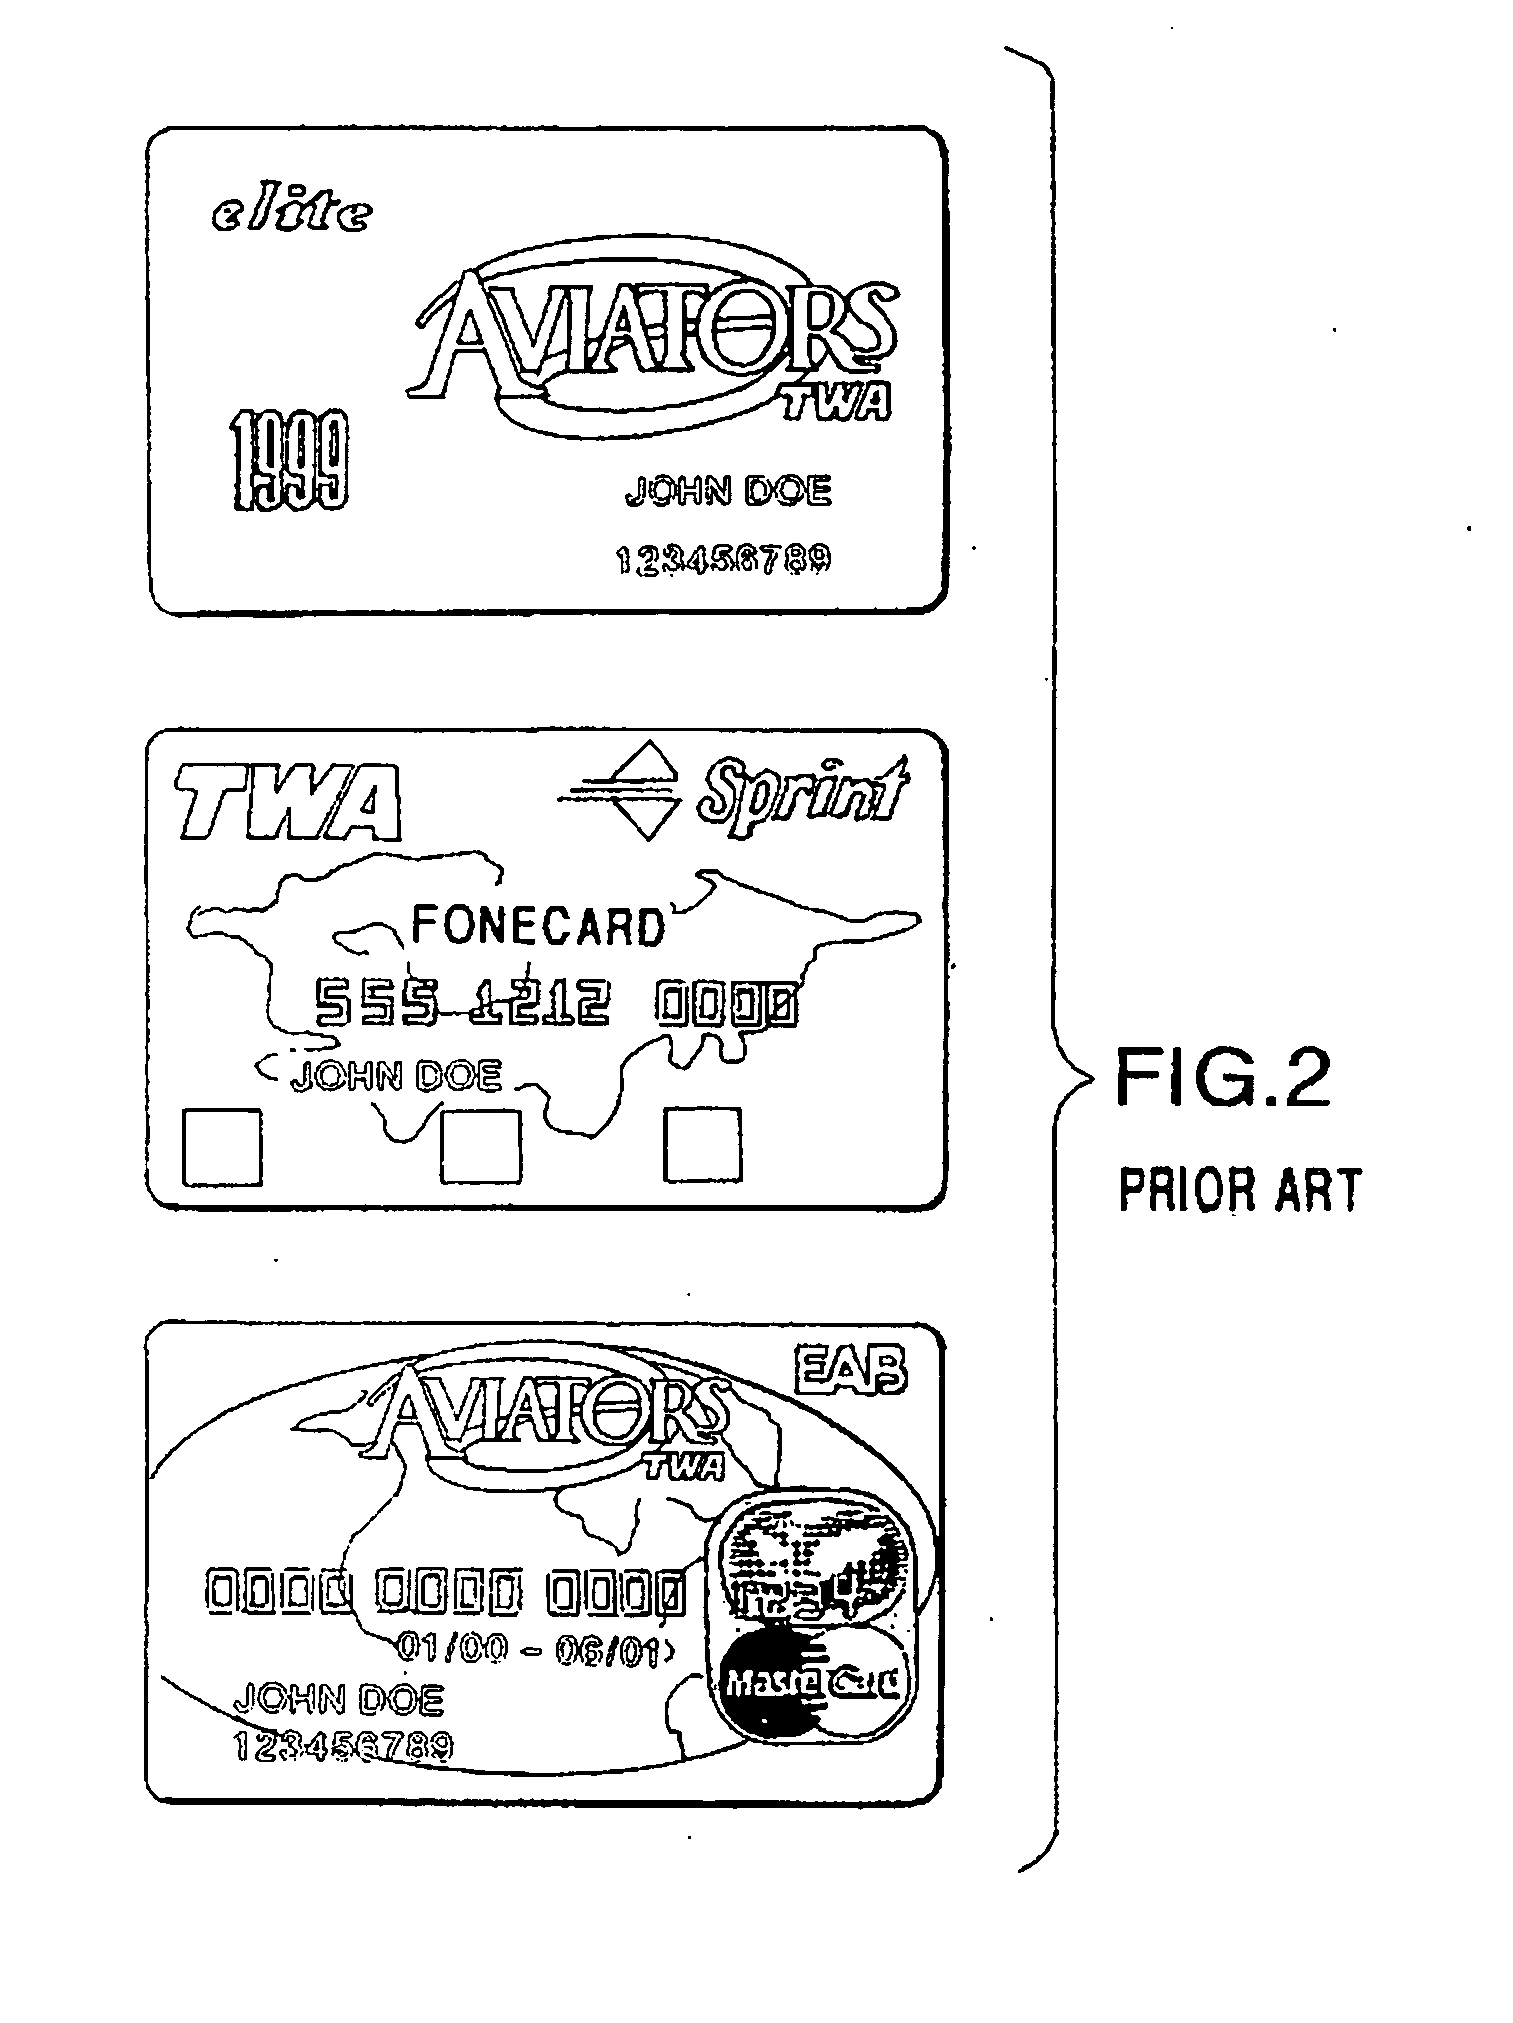 Method and system for issuing, aggregating and redeeming merchant loyalty points with an issuing bank